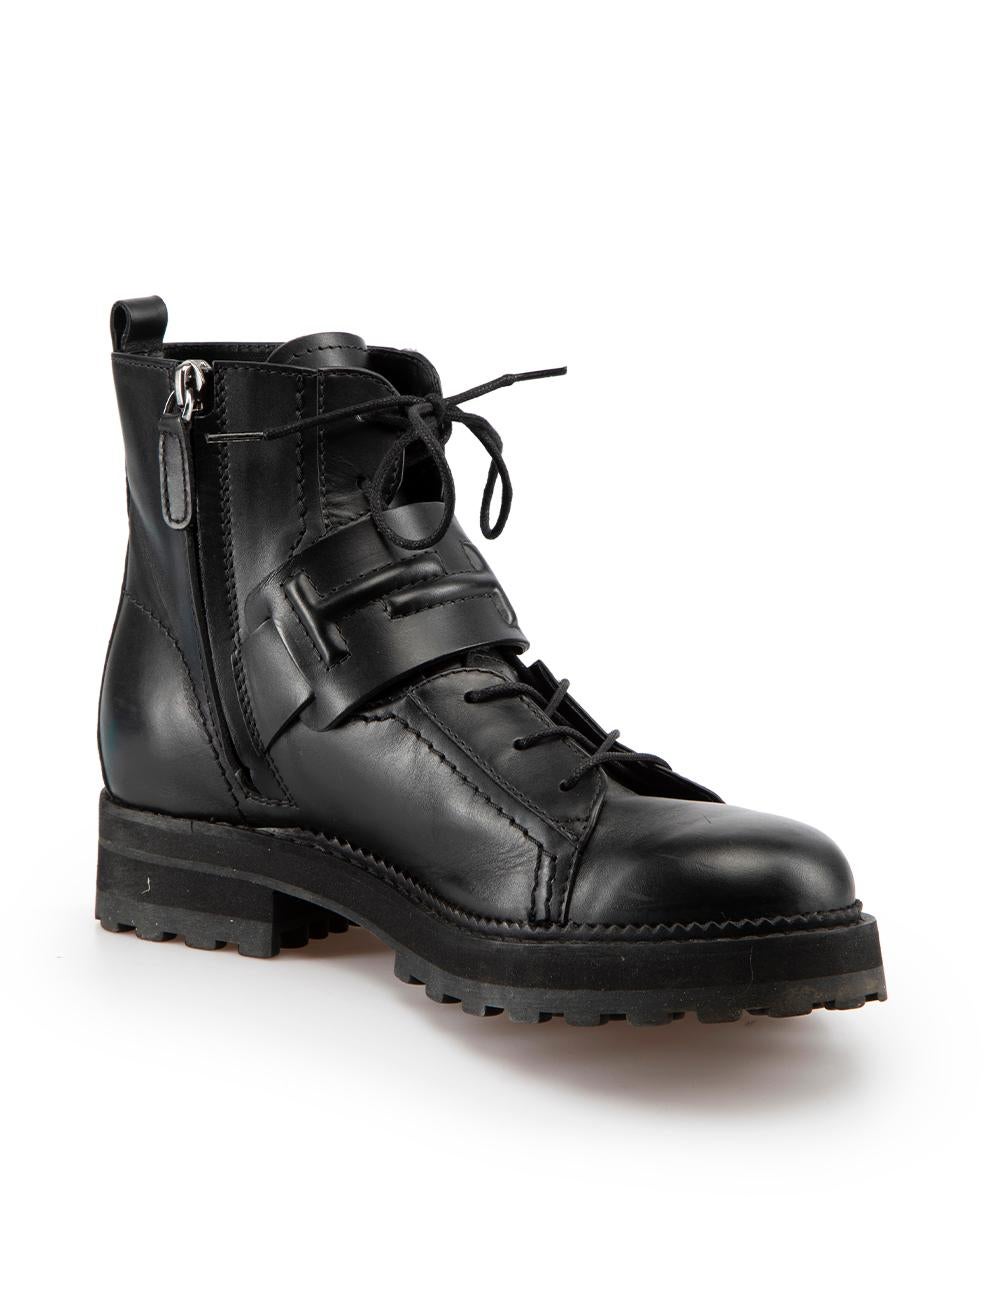 CONDITION is Very good. Minimal wear to boots is evident. Minimal wear to leather uppers with negligible creasing over the toes and on the quarters of this used Tod's designer resale item.

Details
Black
Leather
Combat boots
Round toe
Ankle